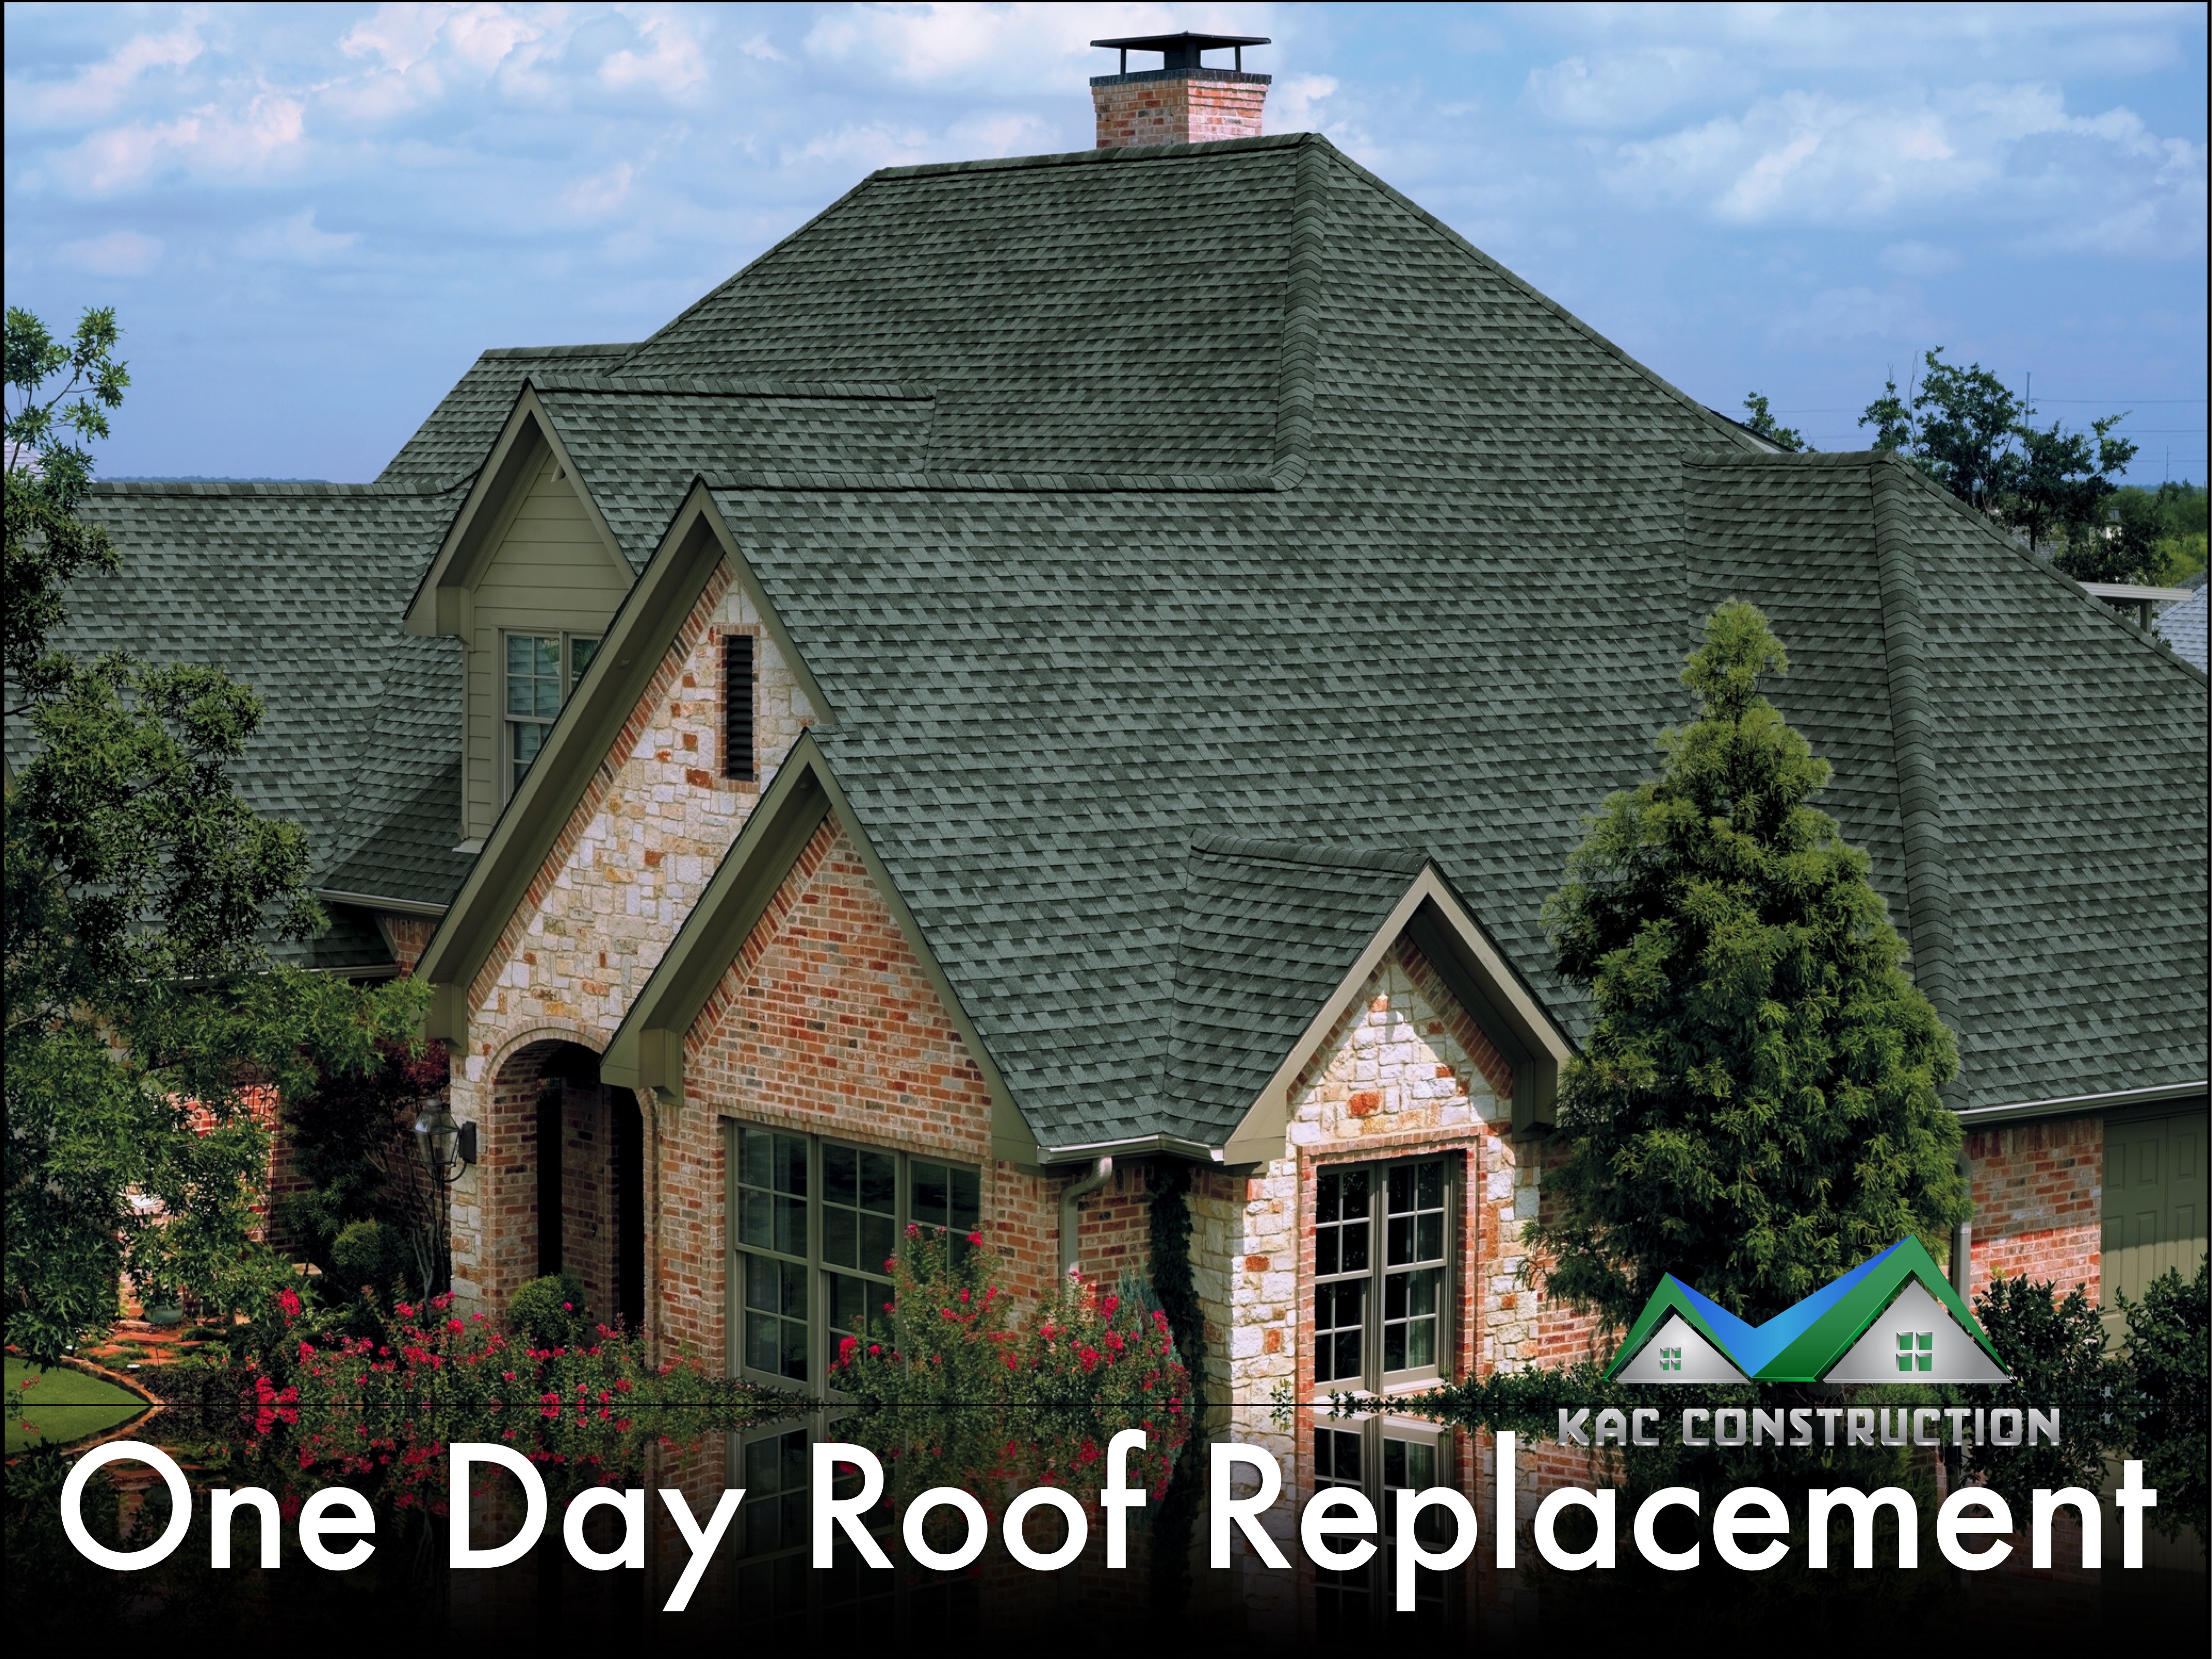 ROOFING CONTRACTOR RI, ROOFING CONTRACTOR IN RI, ROOFING CONTRACTOR RI, ROOFING RI, ROOFING IN RI